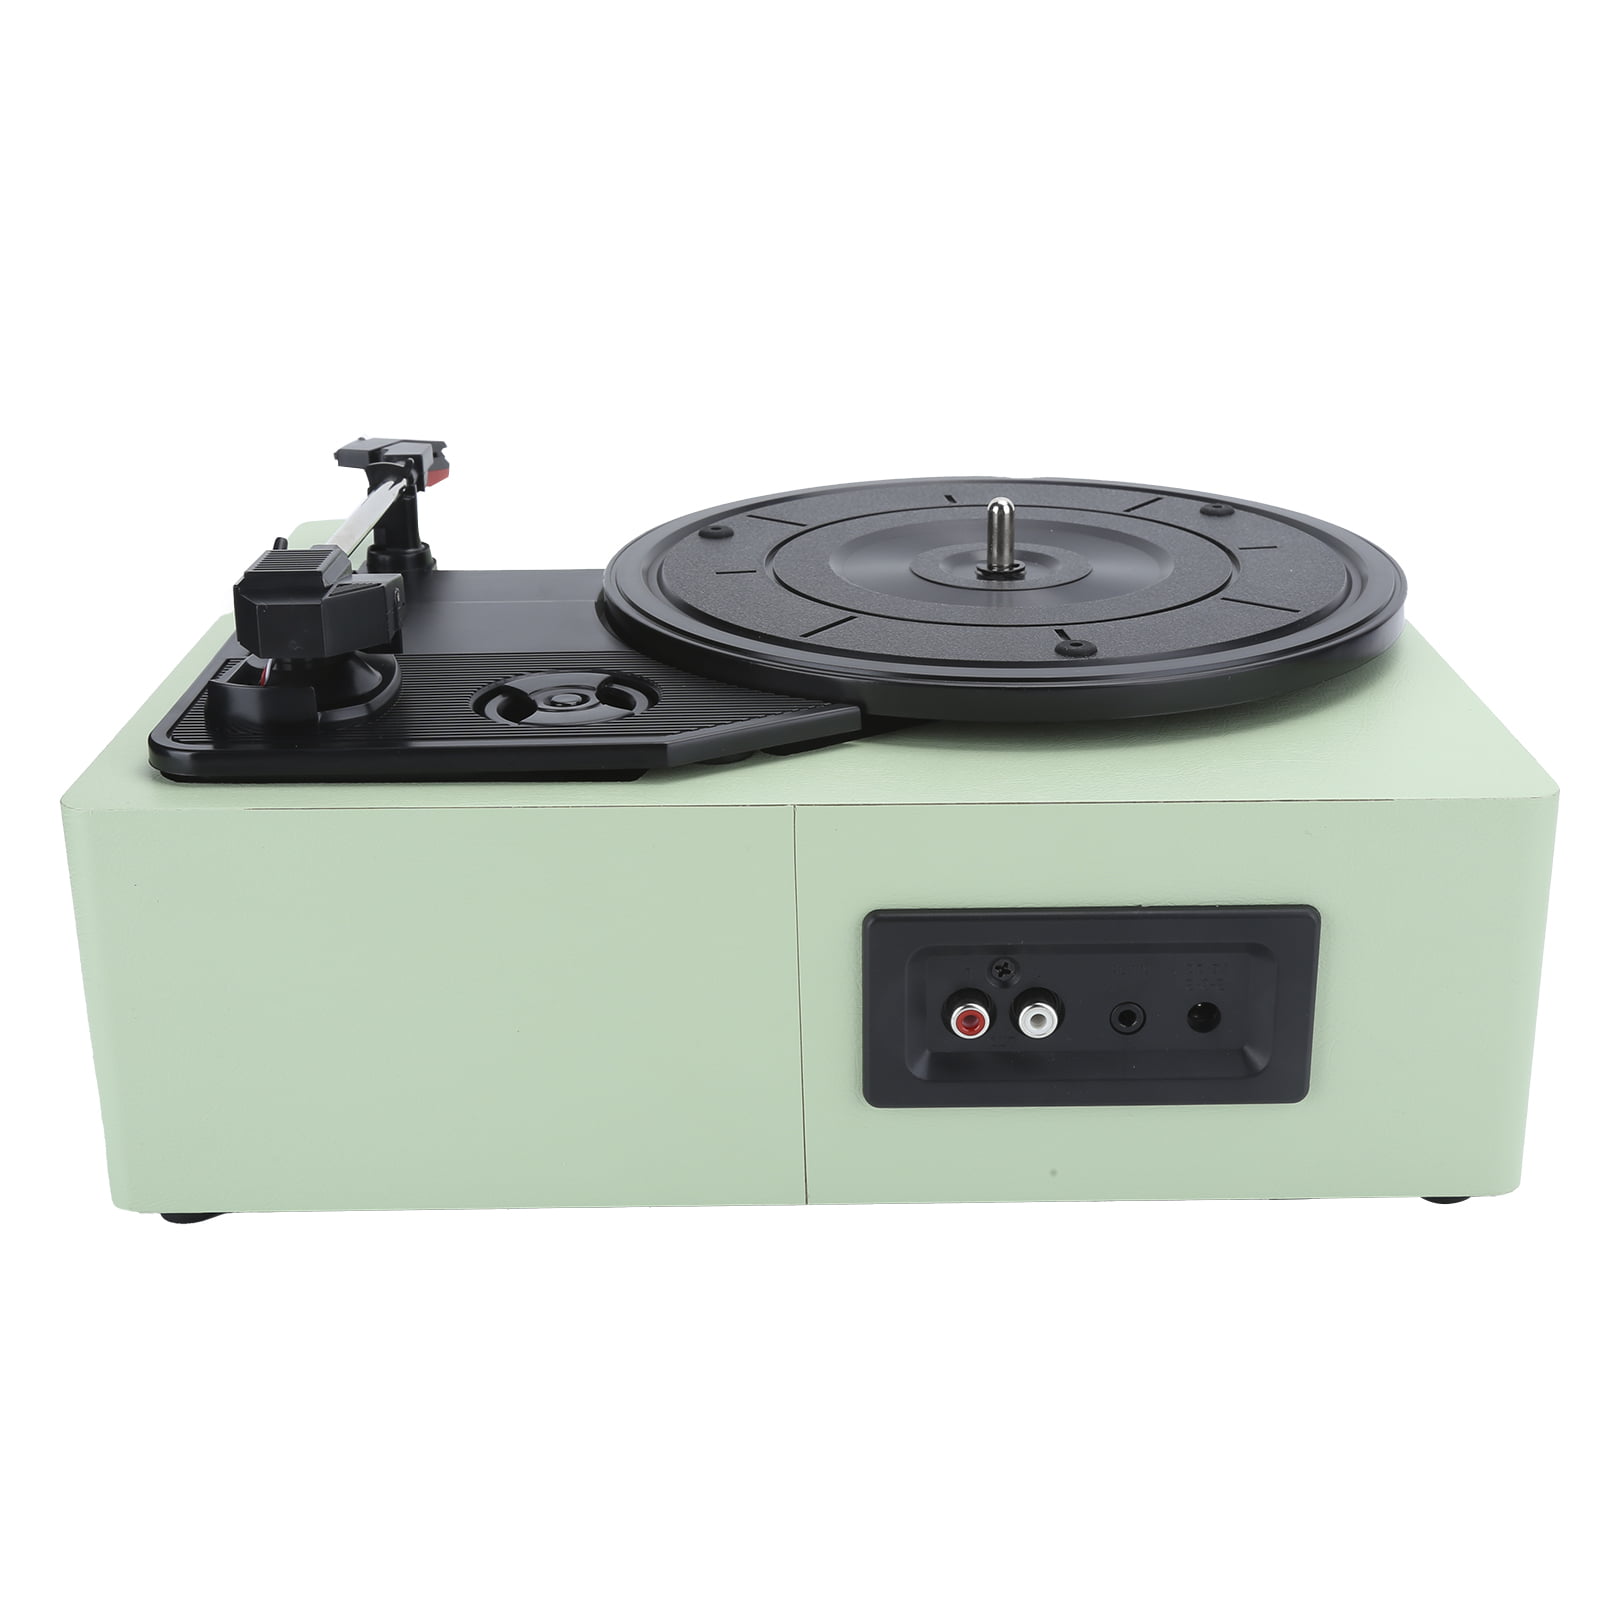 Acouto Hy T05 Vinyl Record Player Vintage Record Player Turntable Household Music Vinyl Turntable Vintage Phonograph With Speakers Portable Speaker Turntable Player 33 45 78 Rpm For R L Walmart Com Walmart Com